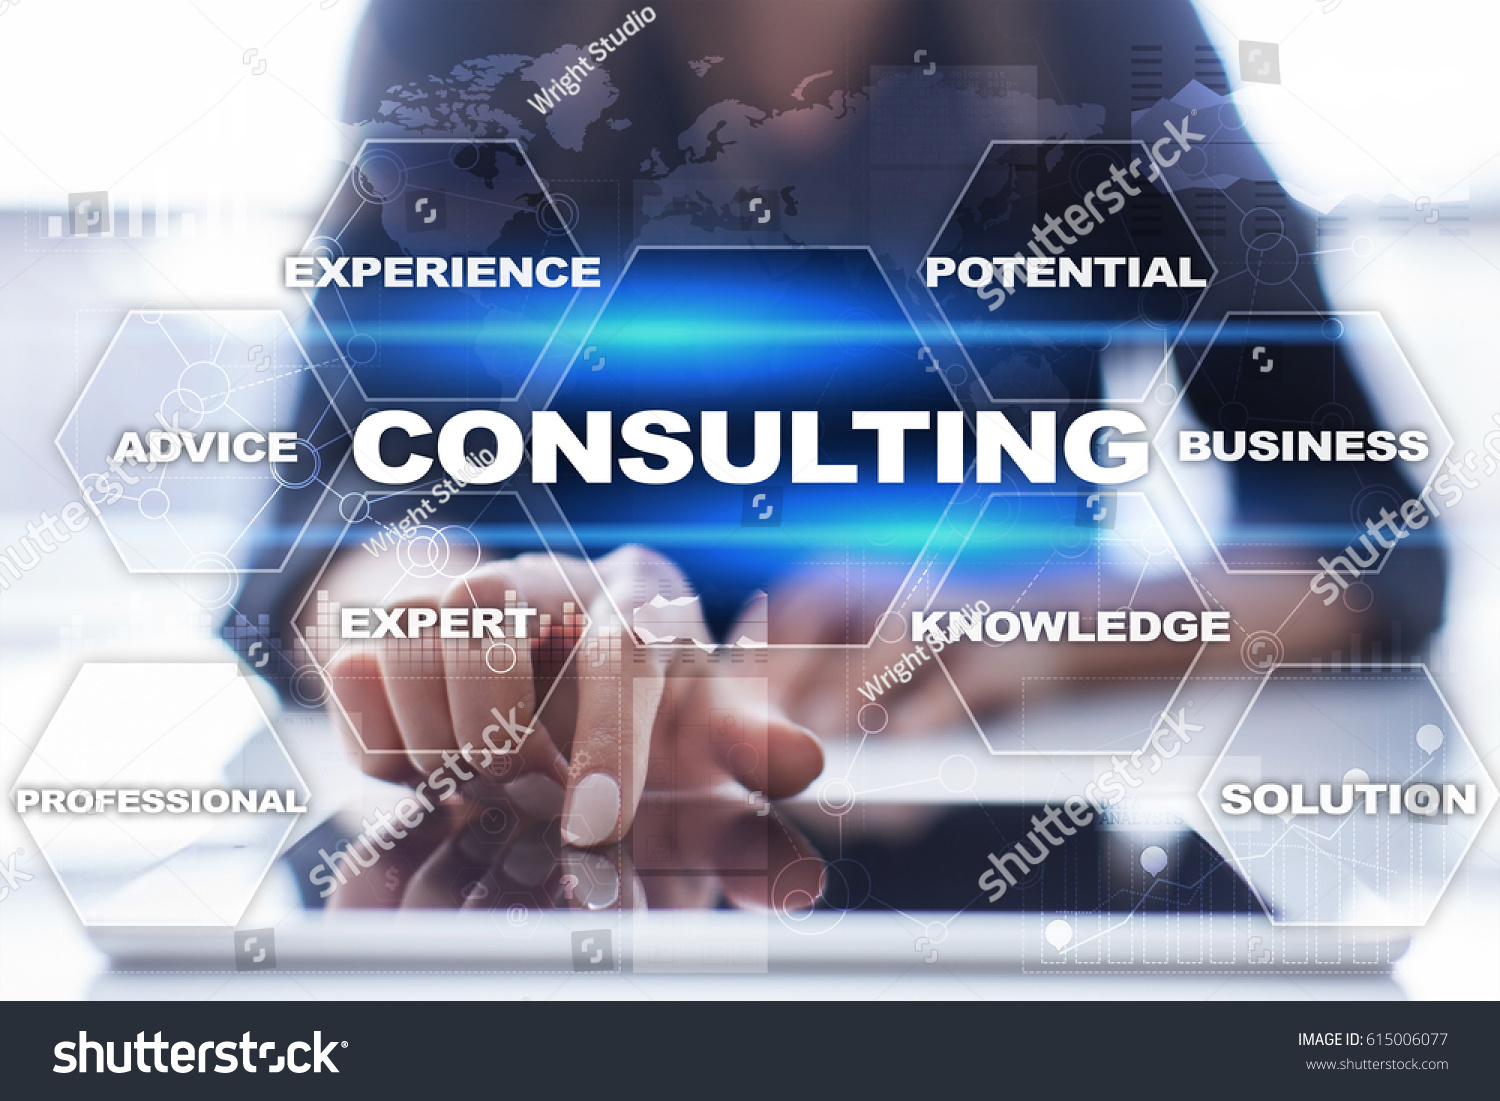 Consulting business concept. Text and icons on virtual screen. #615006077